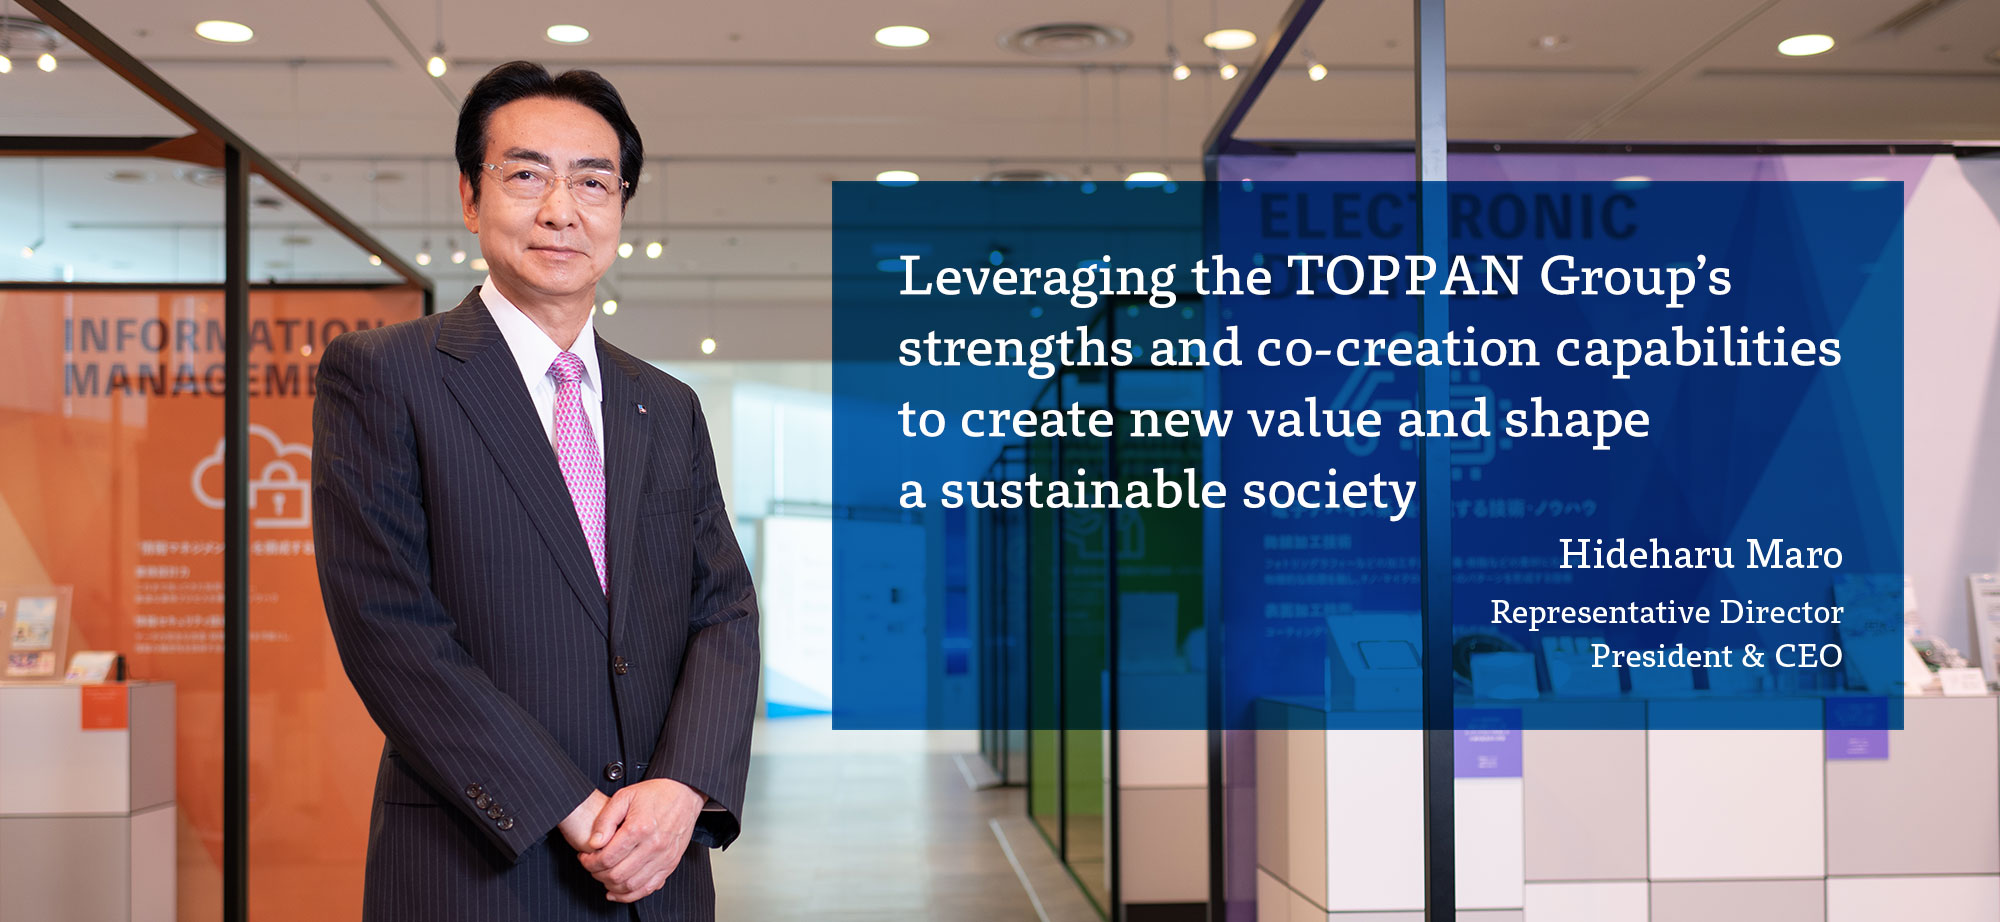 Leveraging the TOPPAN Group’s strengths and co-creation capabilities to create new value and shape a sustainable society